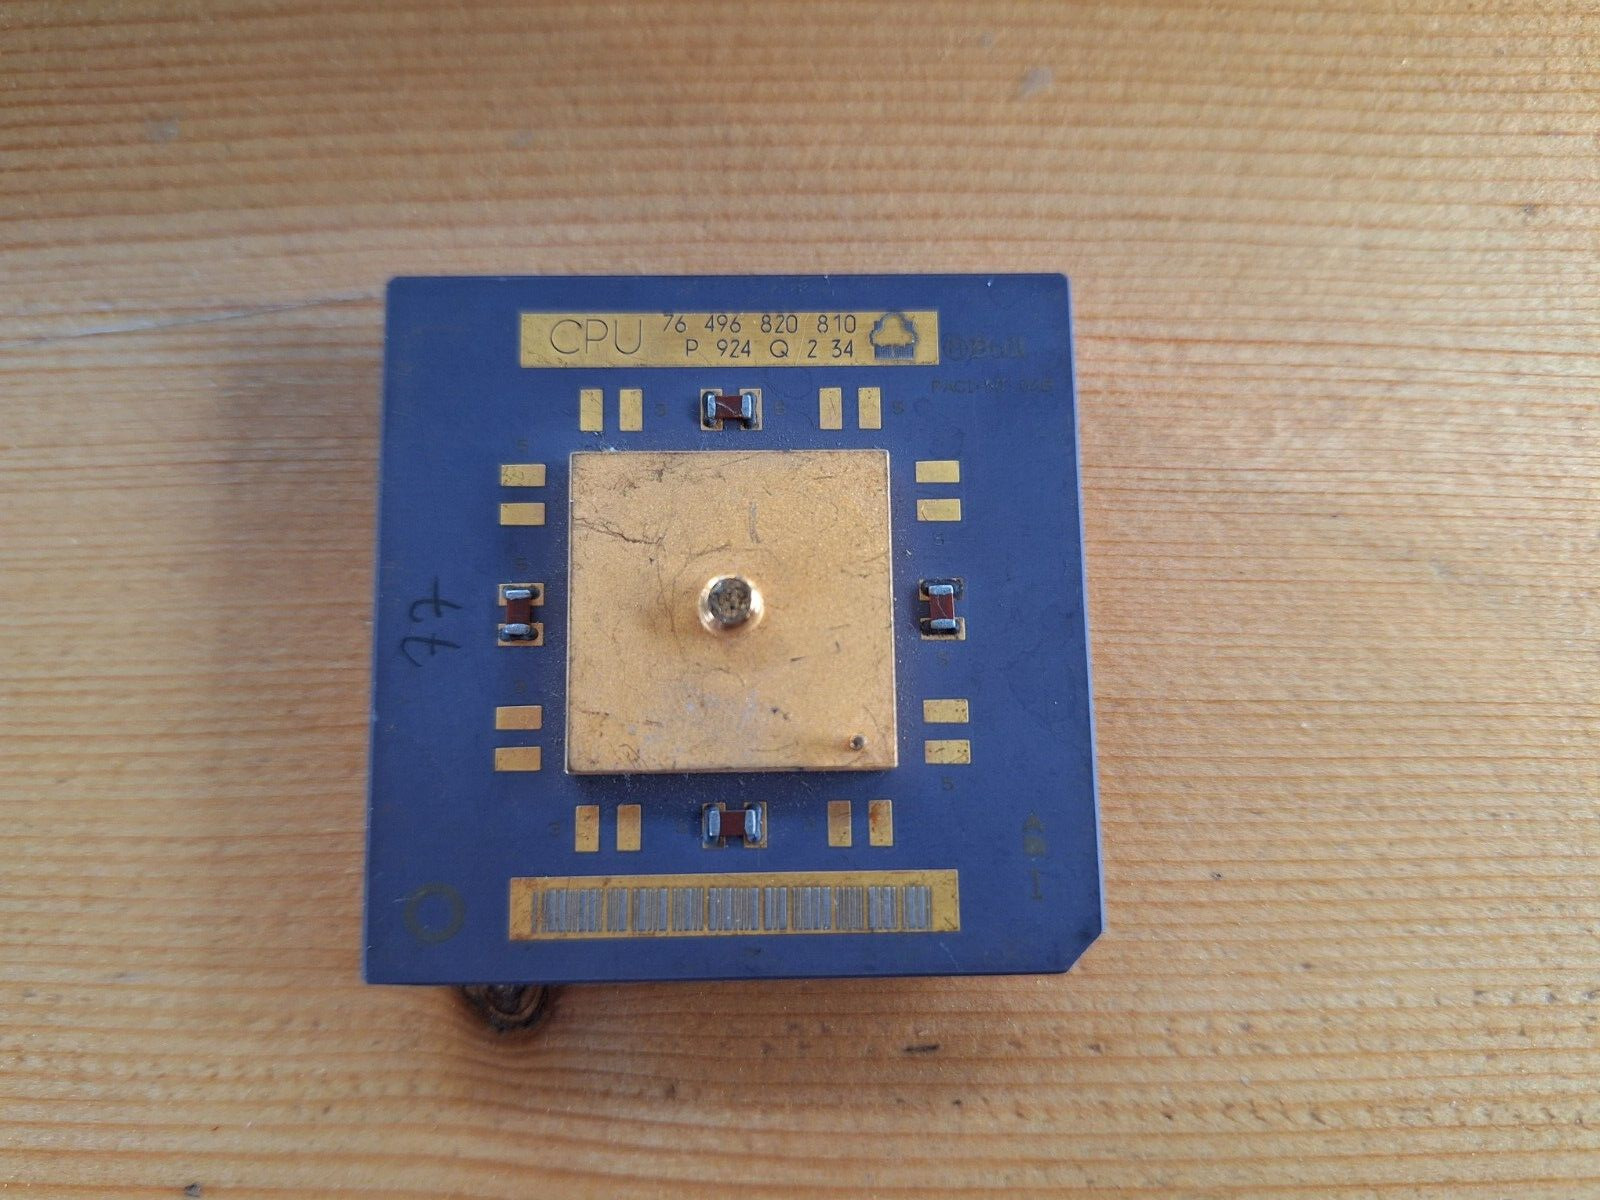 Jupiter CPU from a BULL DPS9000 very rare vintage CPU GOLD